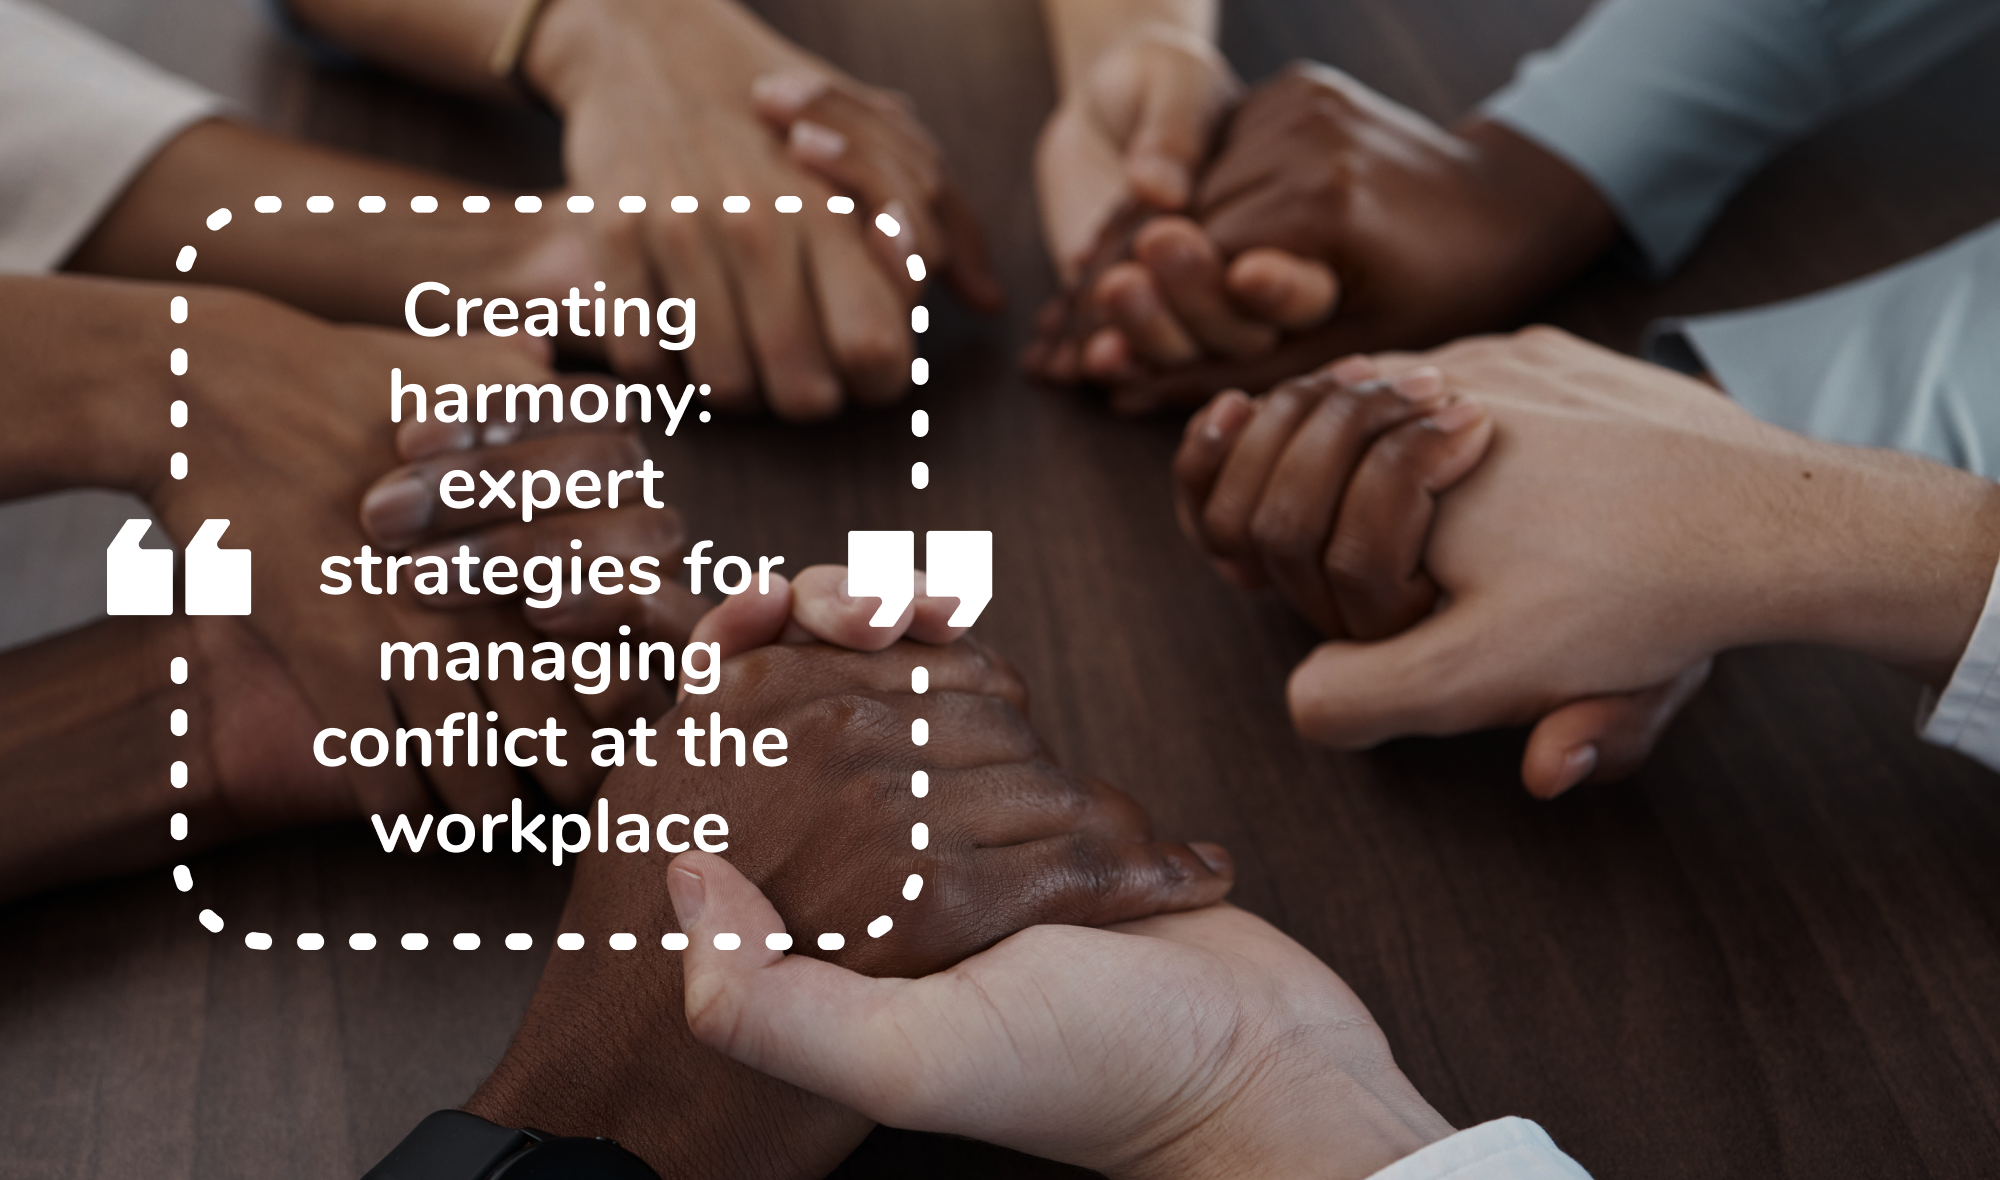 Creating harmony: expert strategies for managing conflict at the workplace